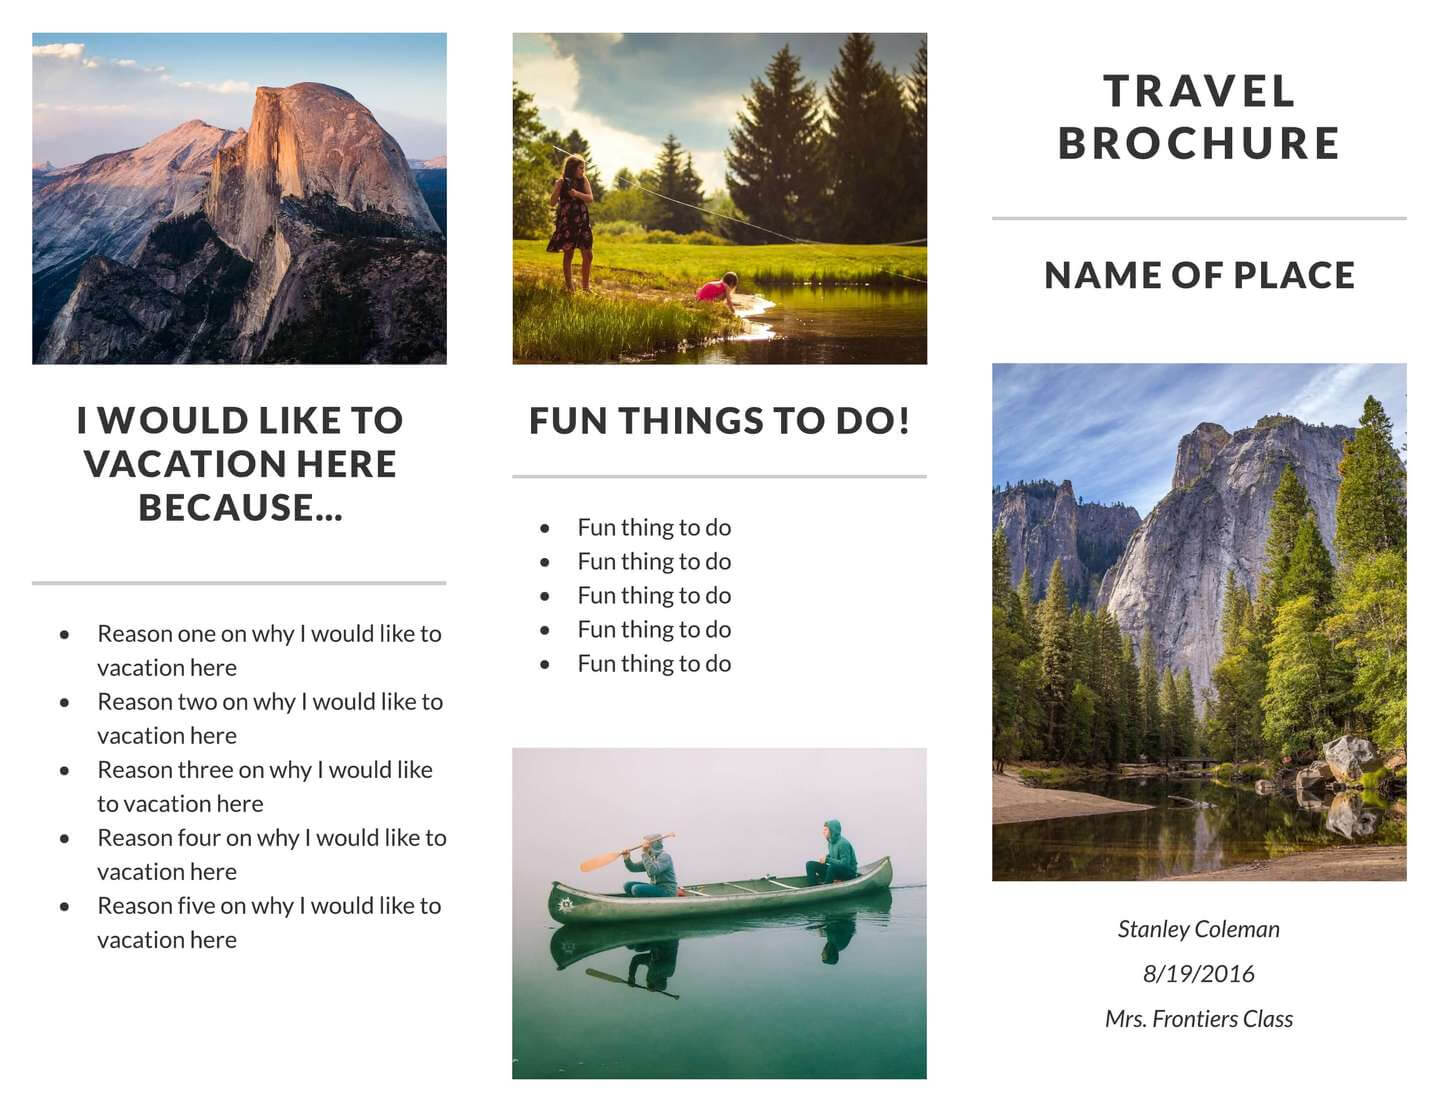 Free Tri Fold Brochure Templates & Examples [15+ Free Templates] Throughout Travel Brochure Template For Students